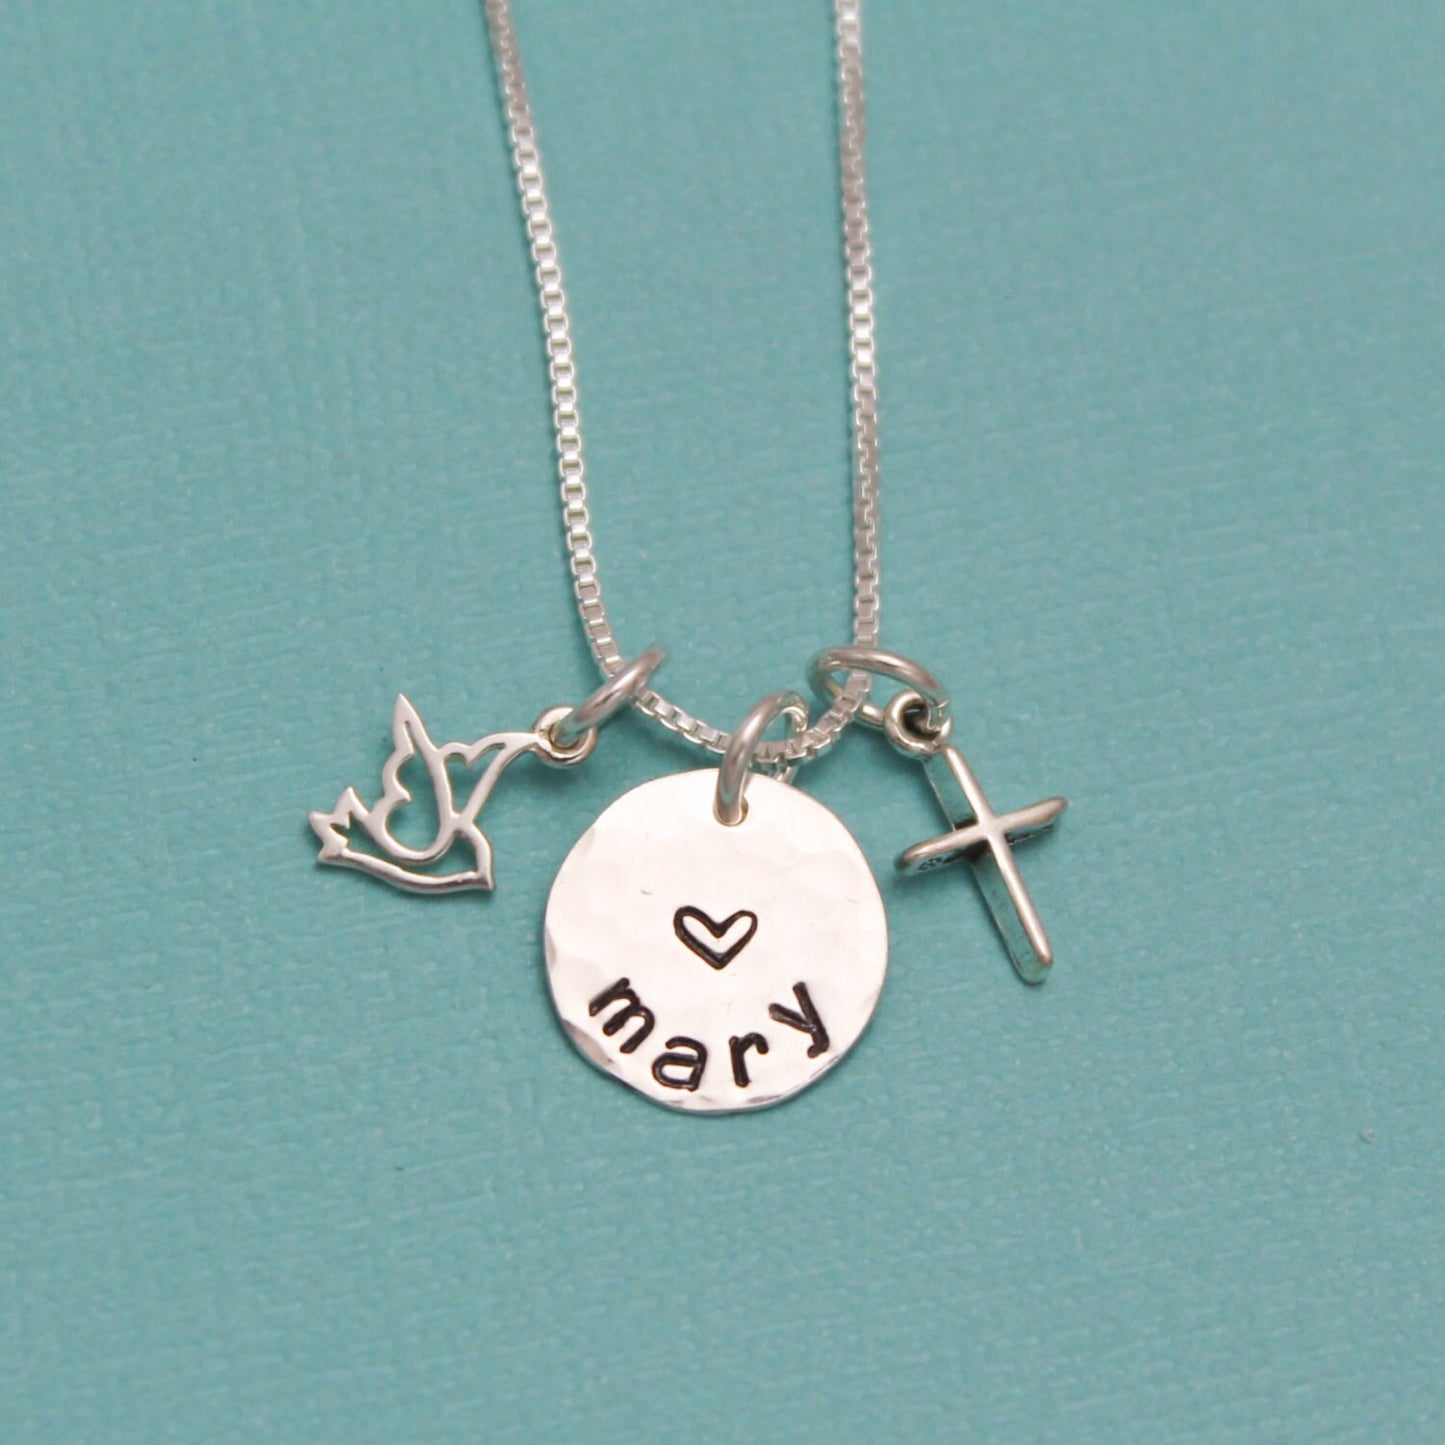 Dove and Cross Charm Necklace for Confirmation Personalized Sterling Silver Hand Stamped Jewelry